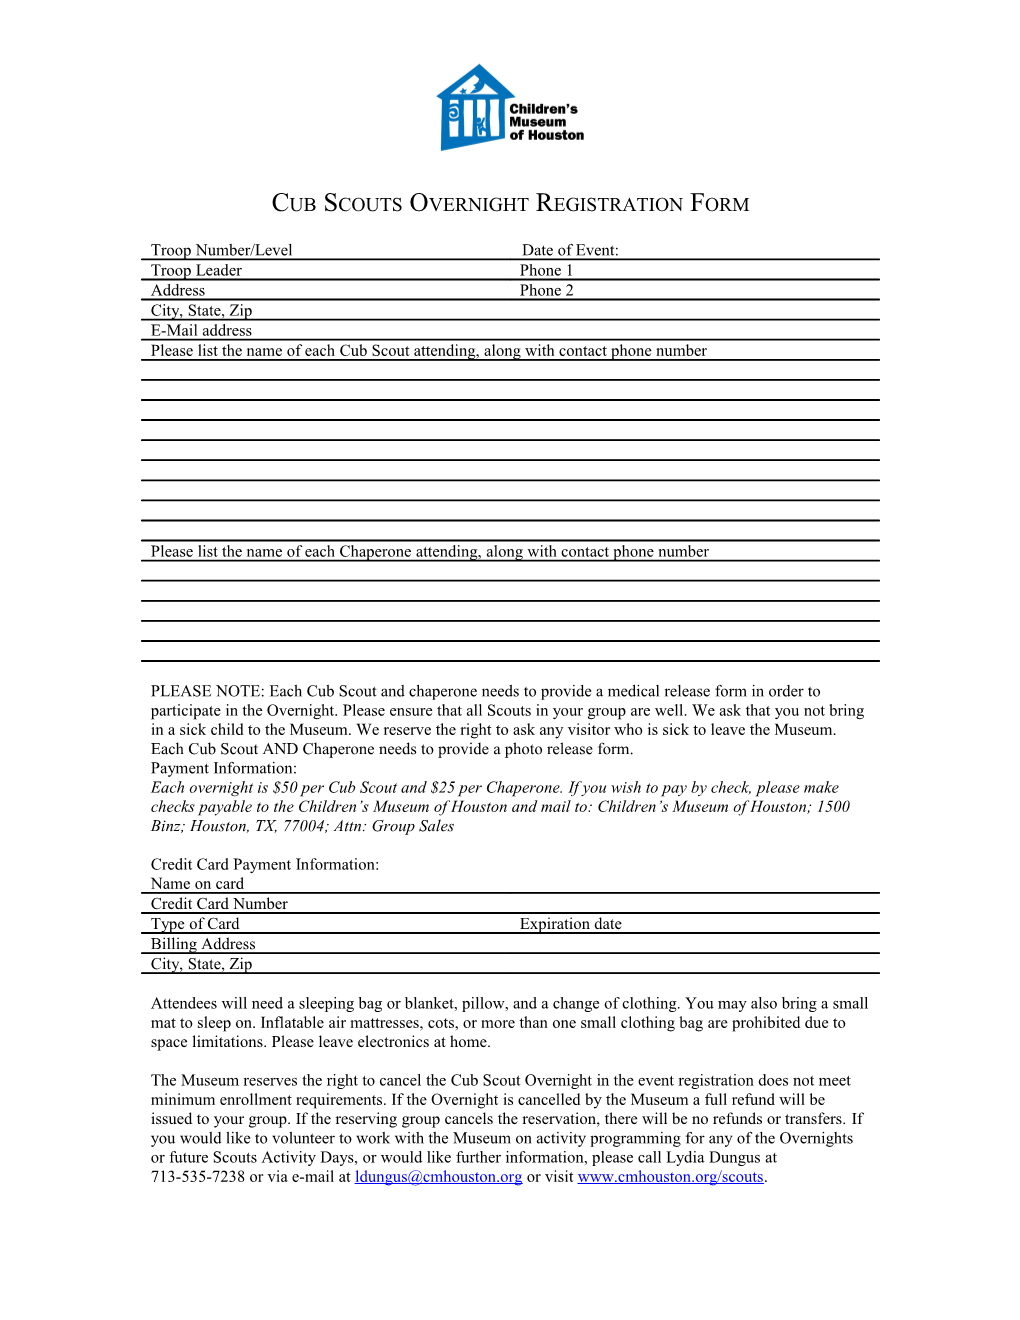 Cubscouts Overnight Registration Form